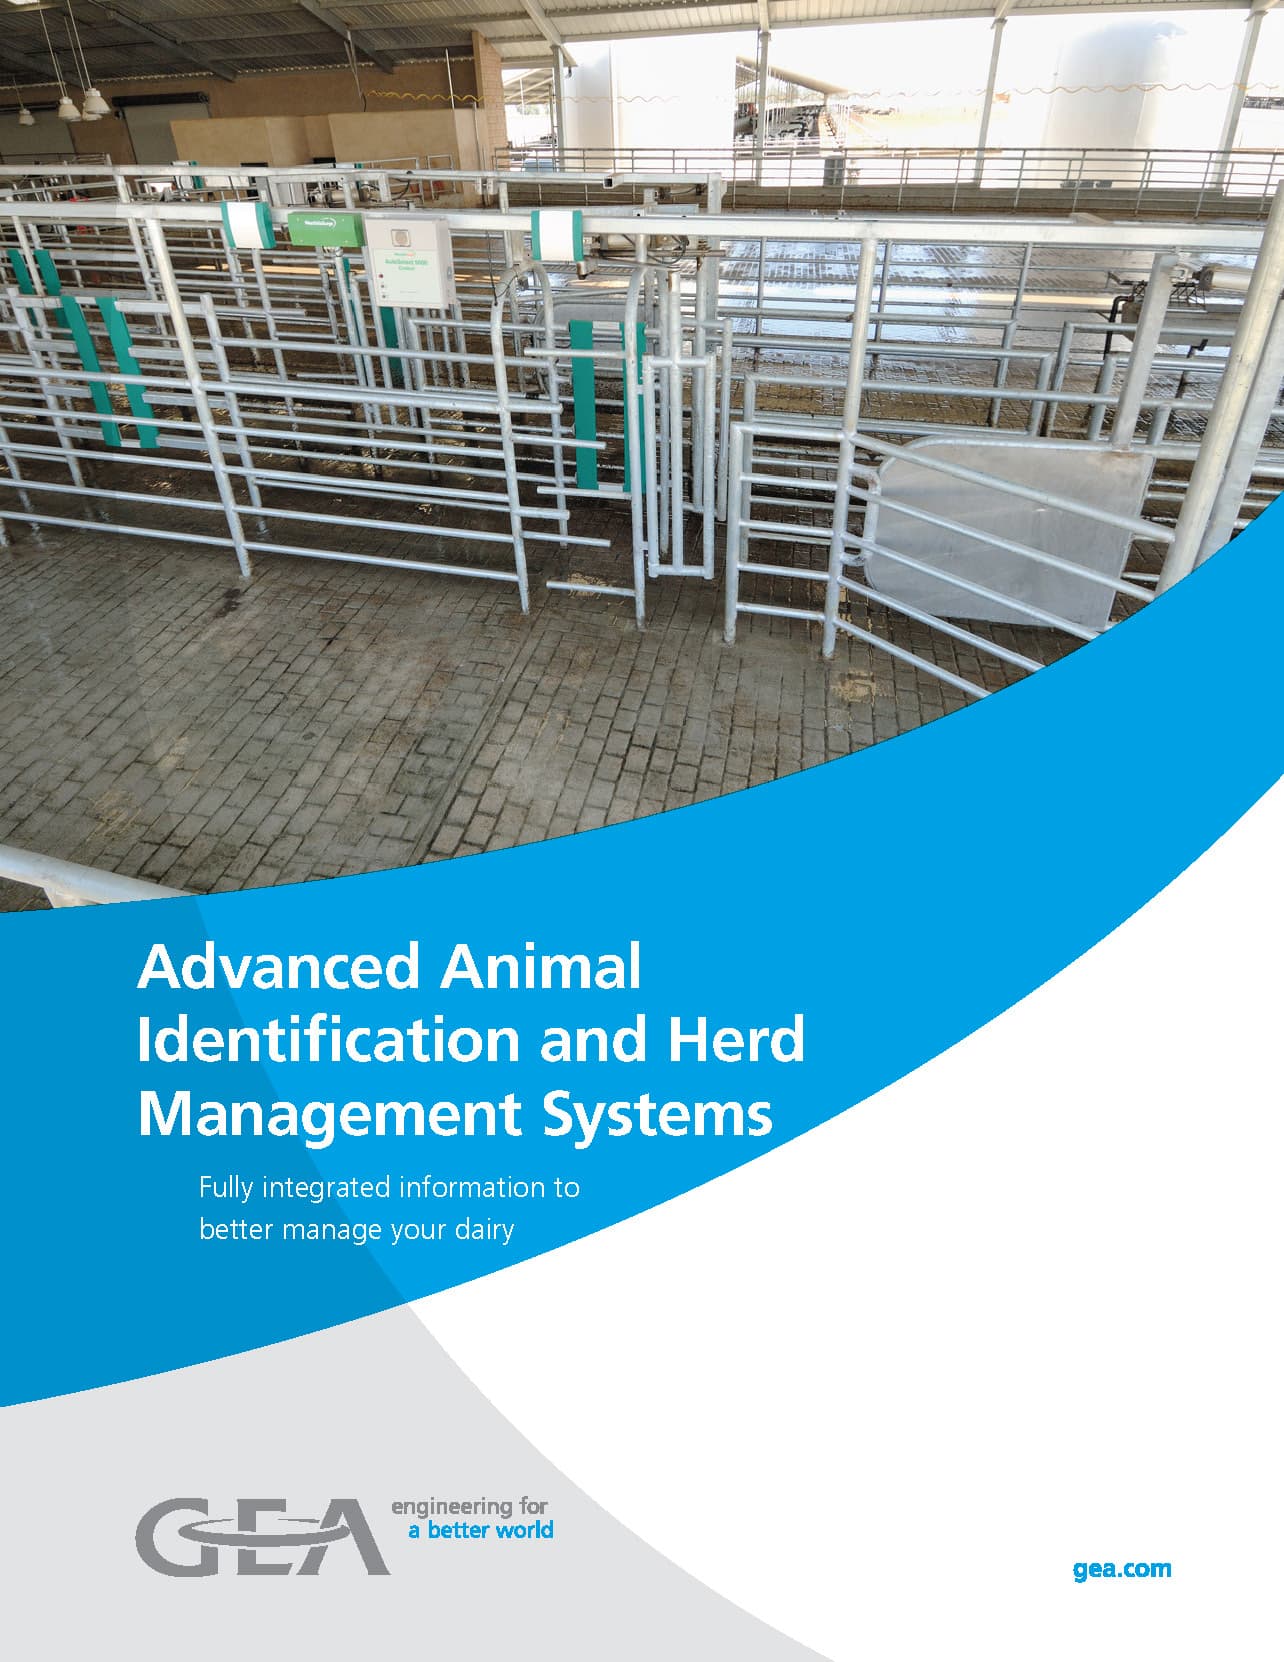 GEA Activity Monitoring - Dairy Lane Systems - Dairy Equip